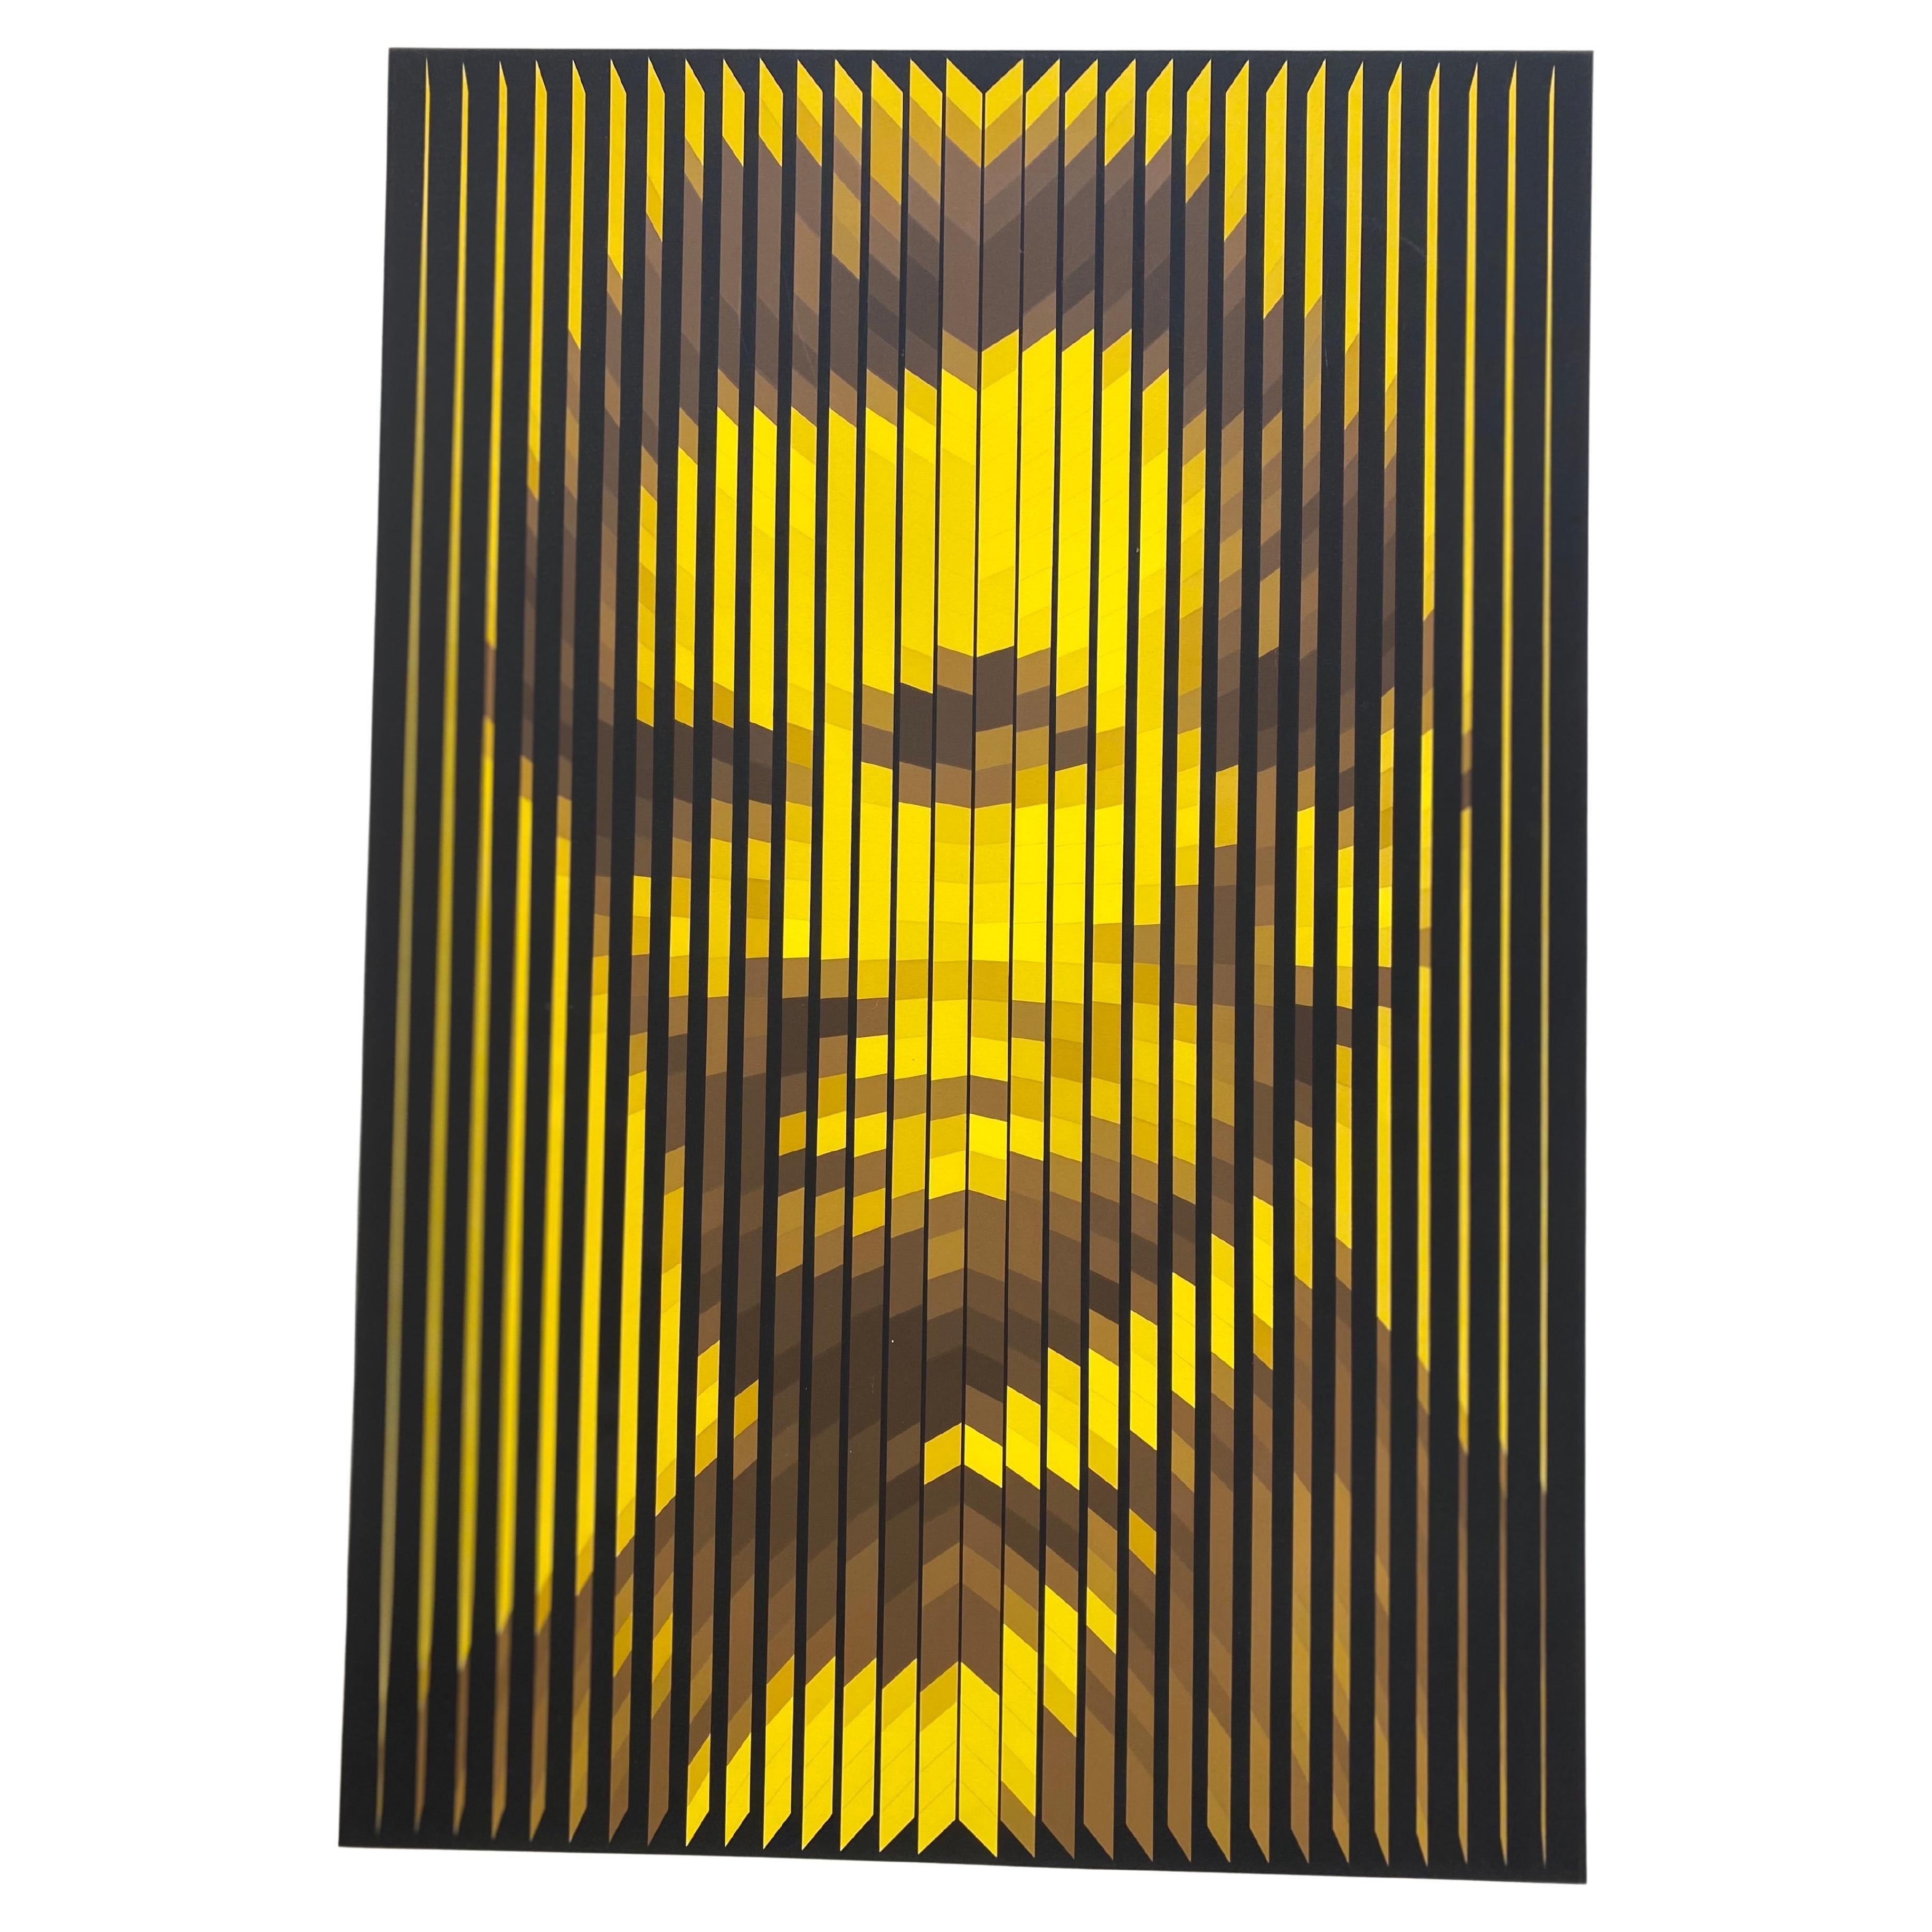 YVARAL, "Abraham Lincoln 1979 For Sale